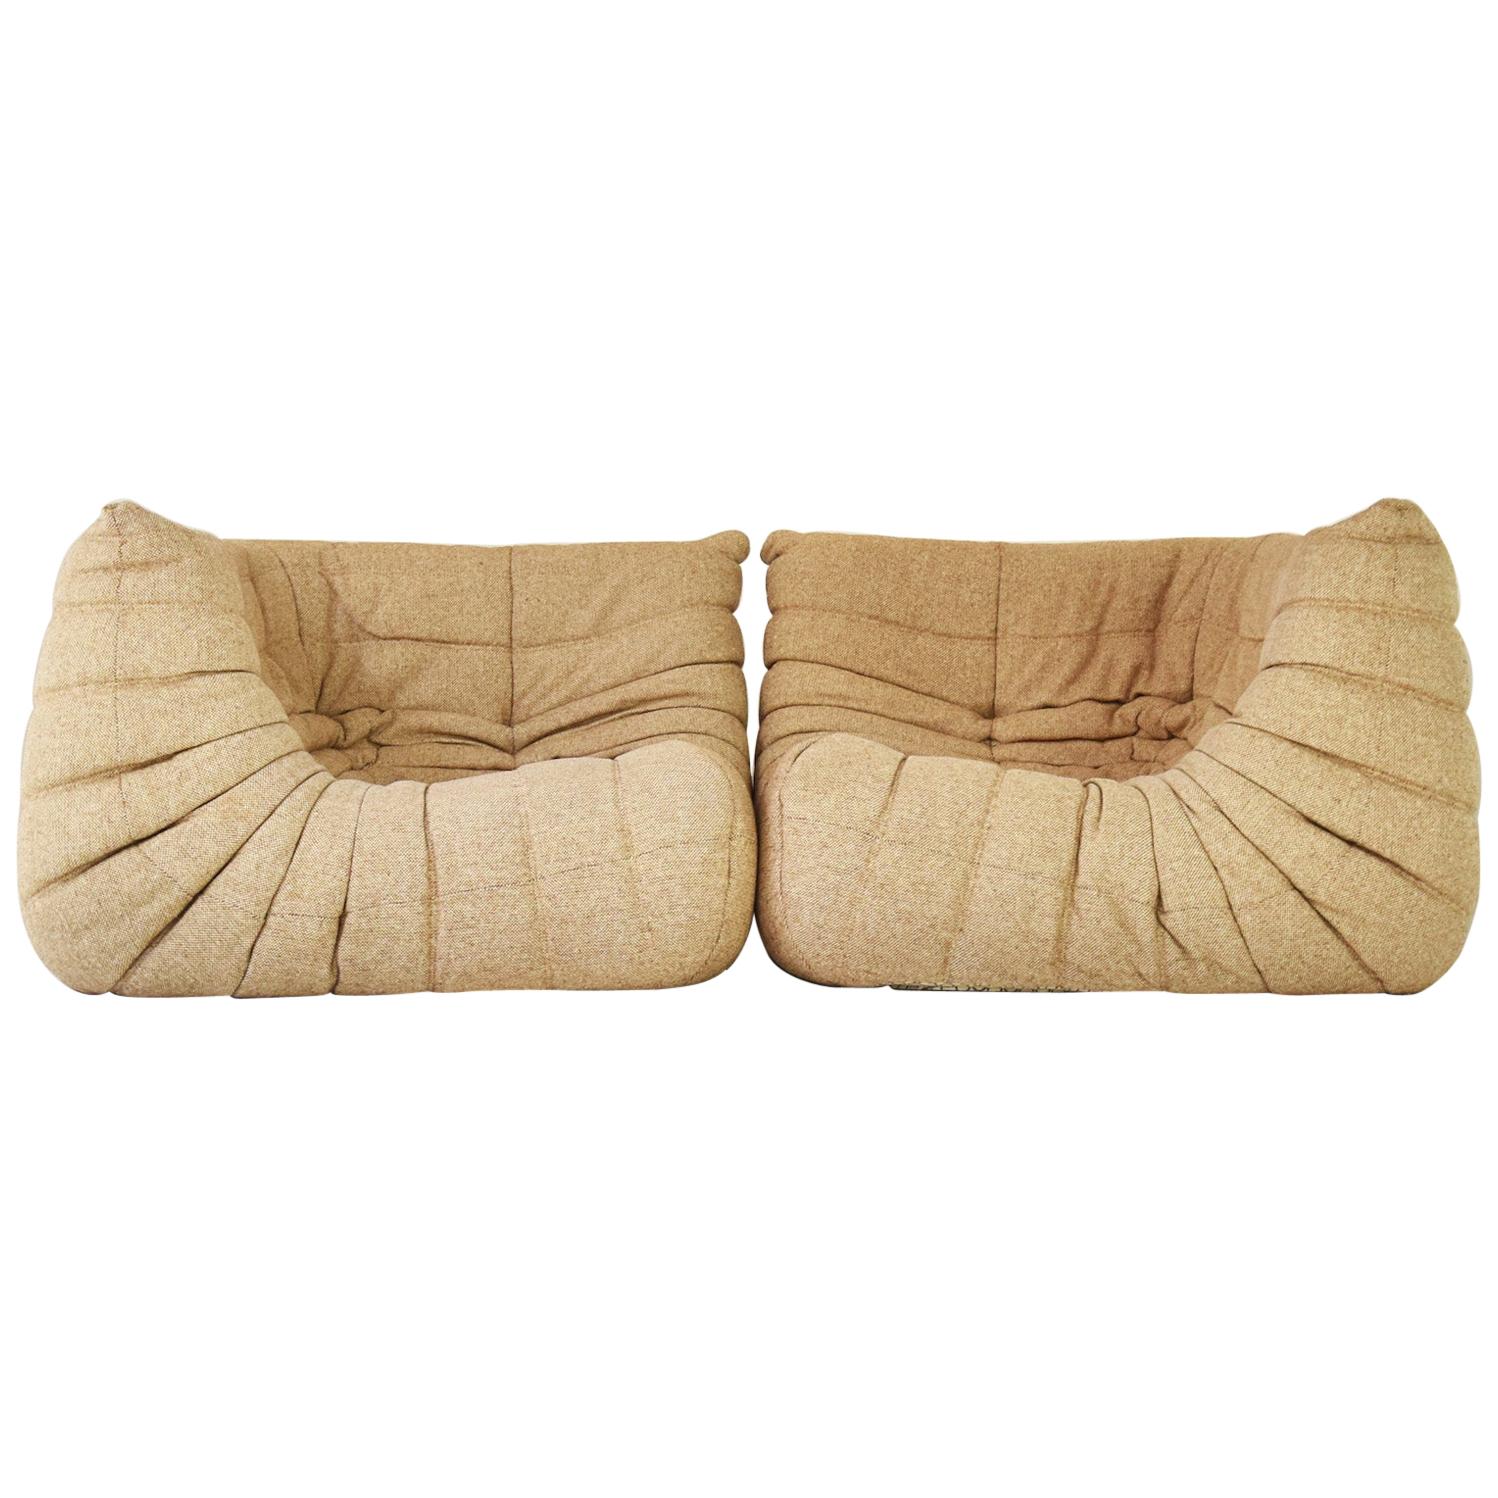 Set of Two ‘Togo’ Corner Seaters by Michel Ducaroy for Ligne Roset, France 1960s